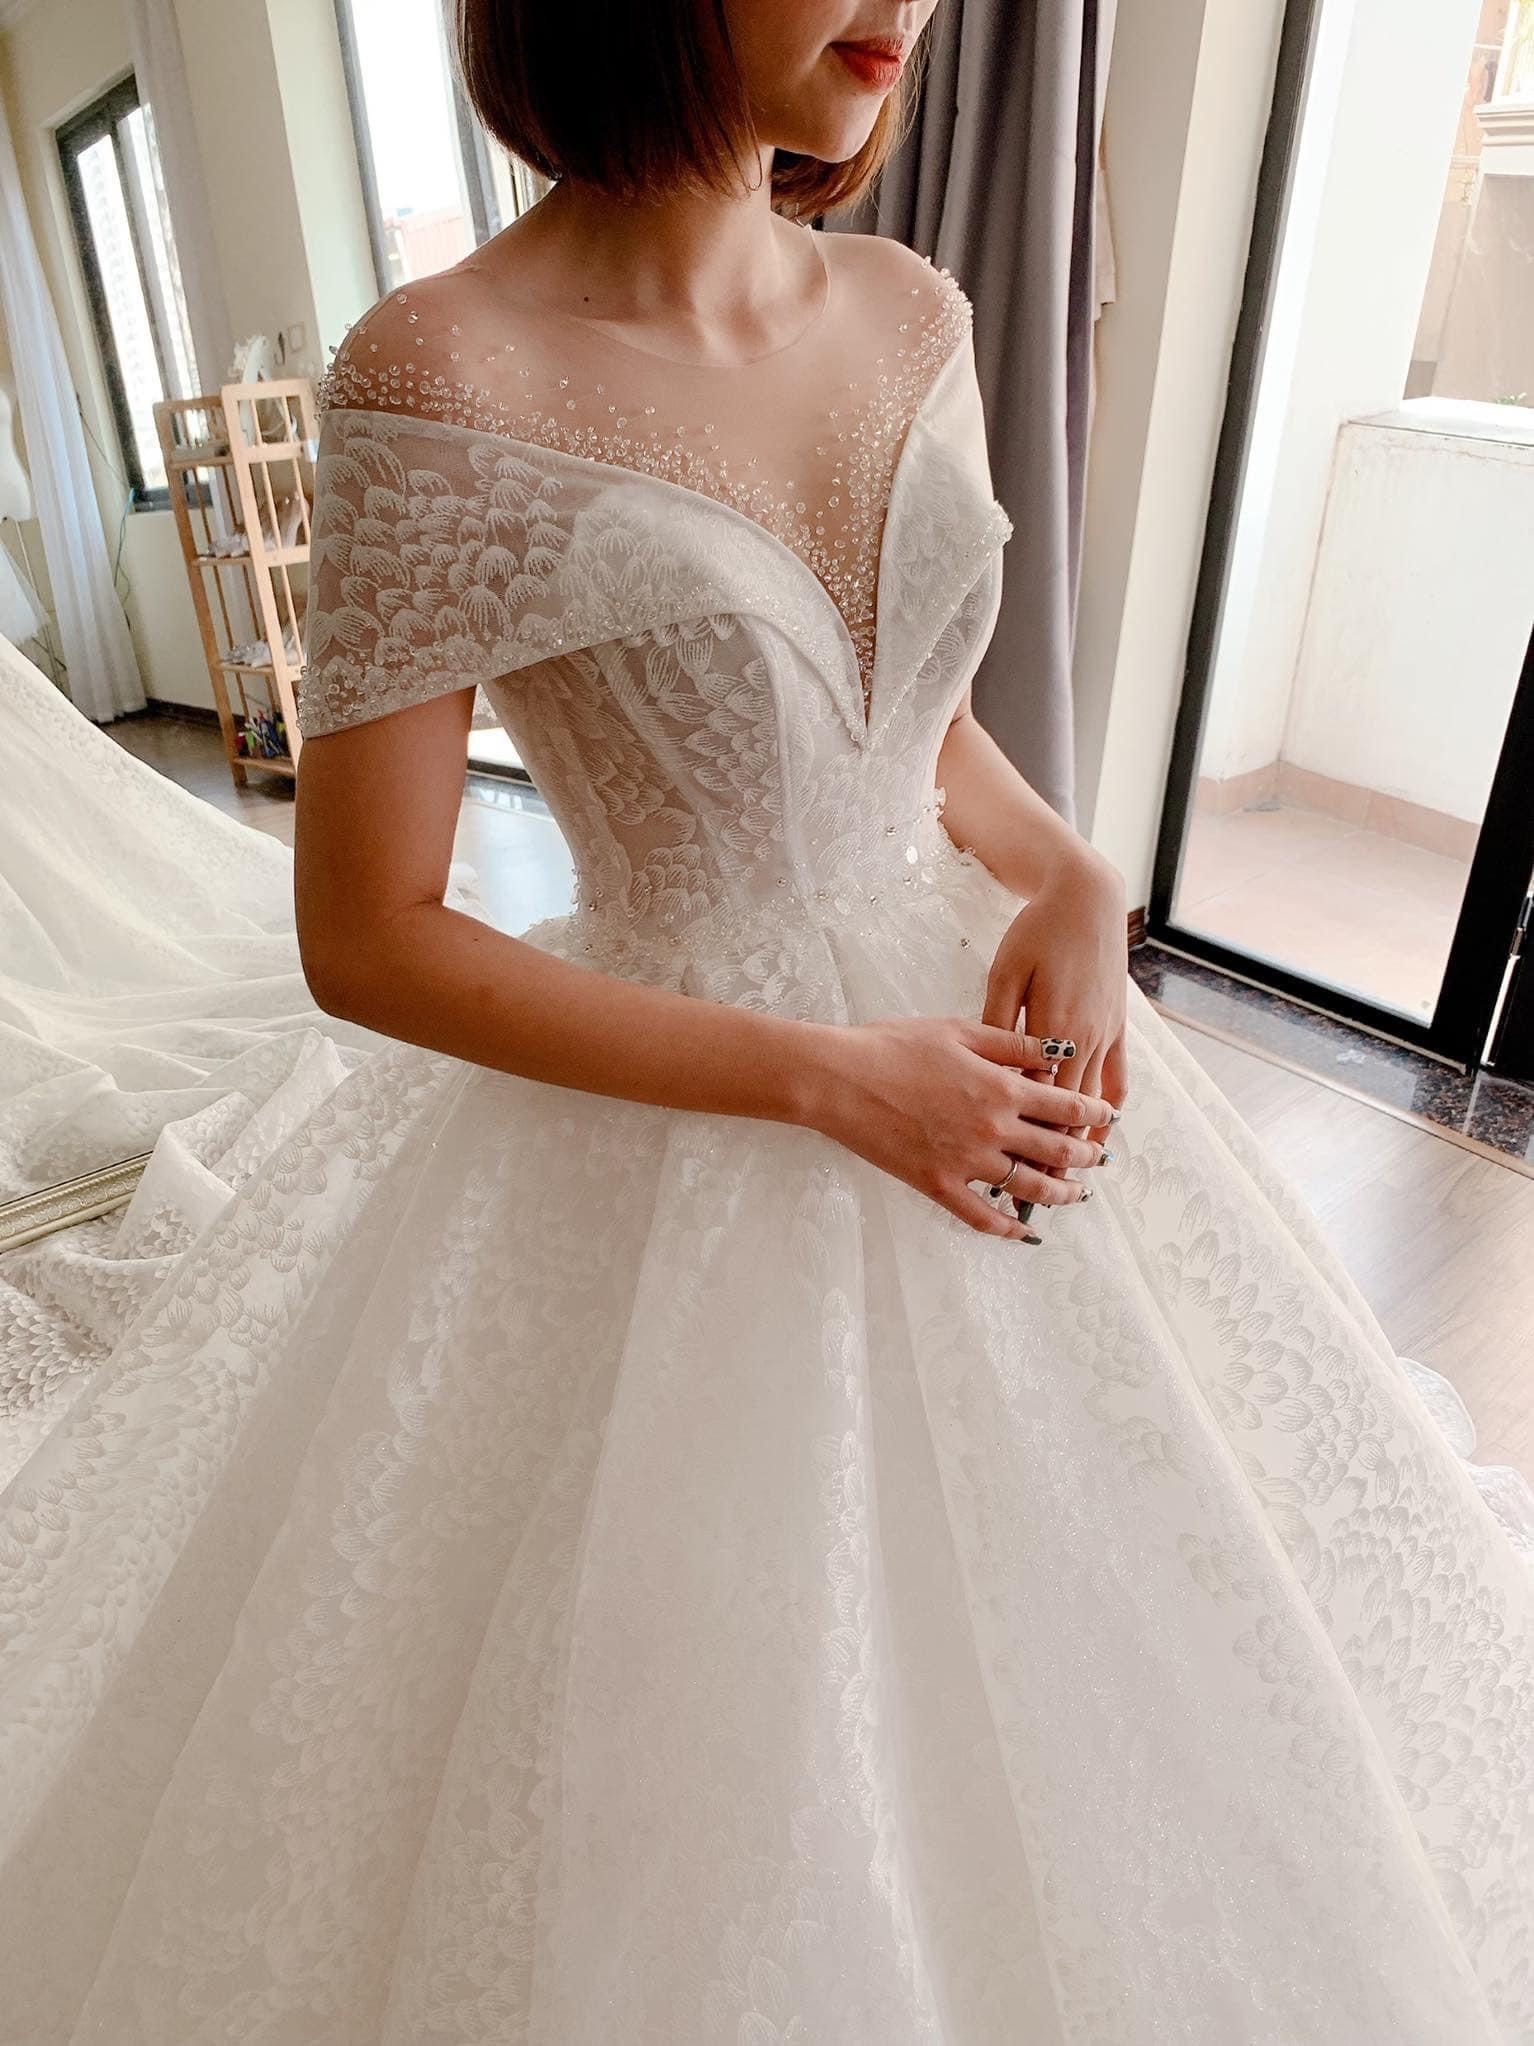 Interesting glitter patterned white sparkle ballgown wedding dress with  short train - various styles